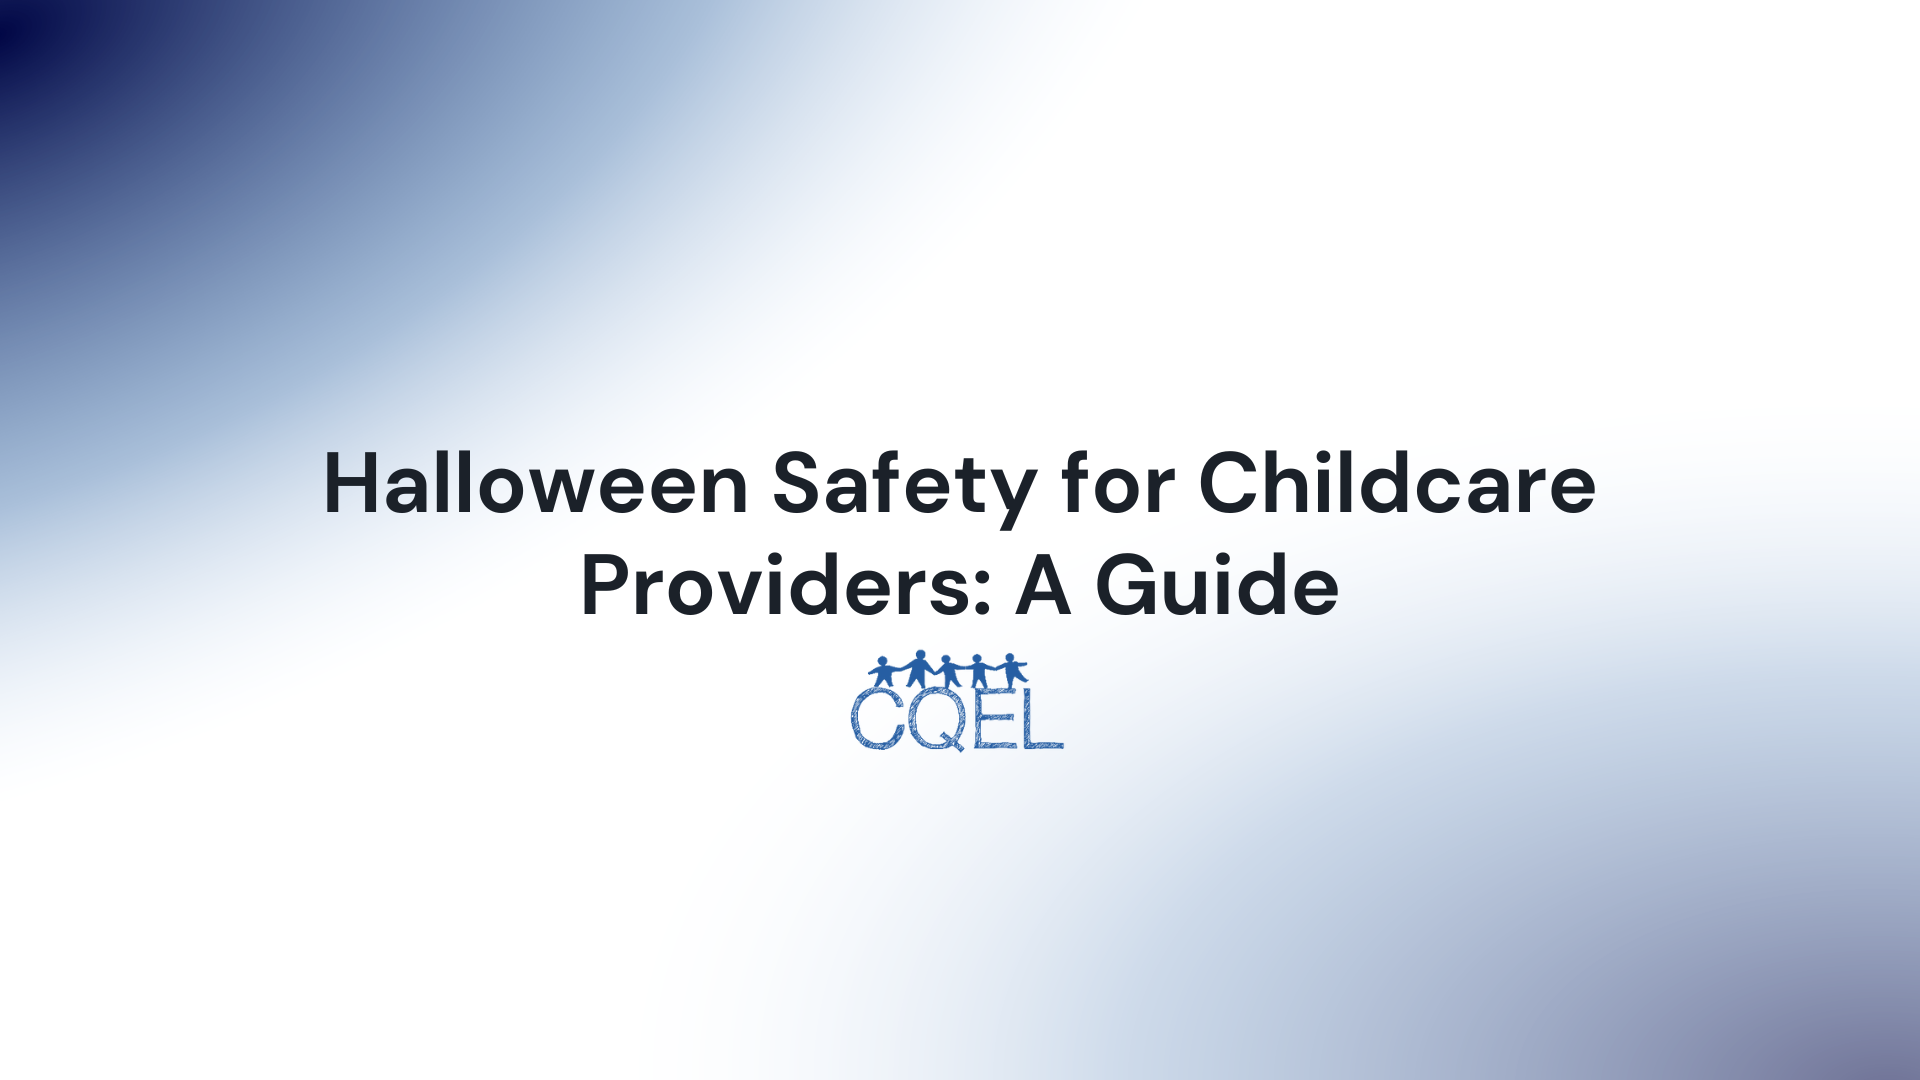 Halloween Safety for Childcare Providers: A Guide